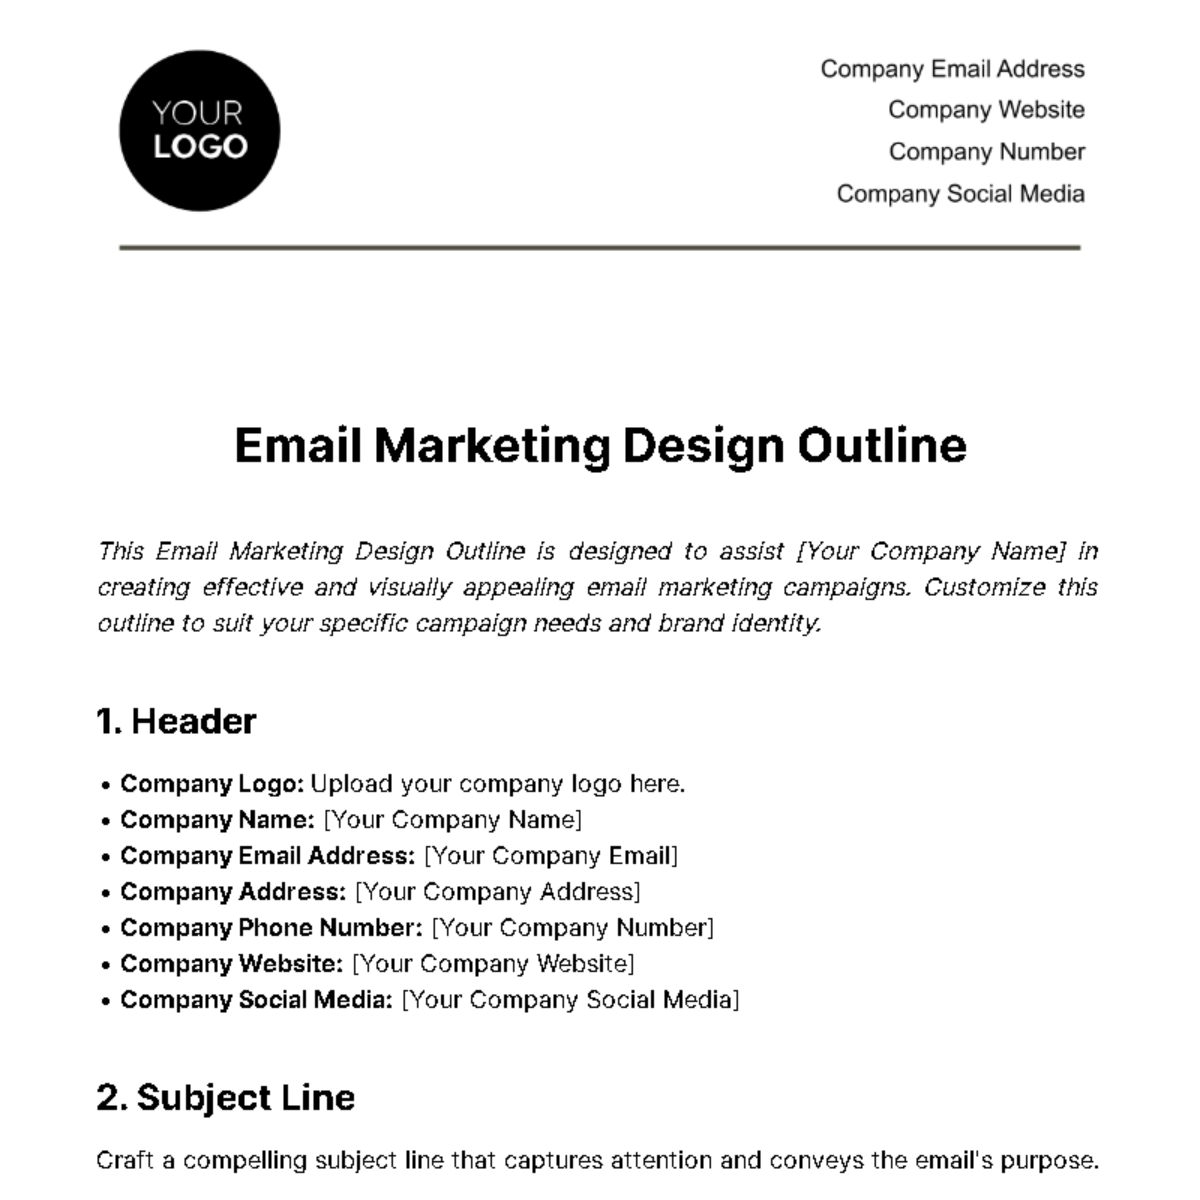 Email Marketing Design Outline Template